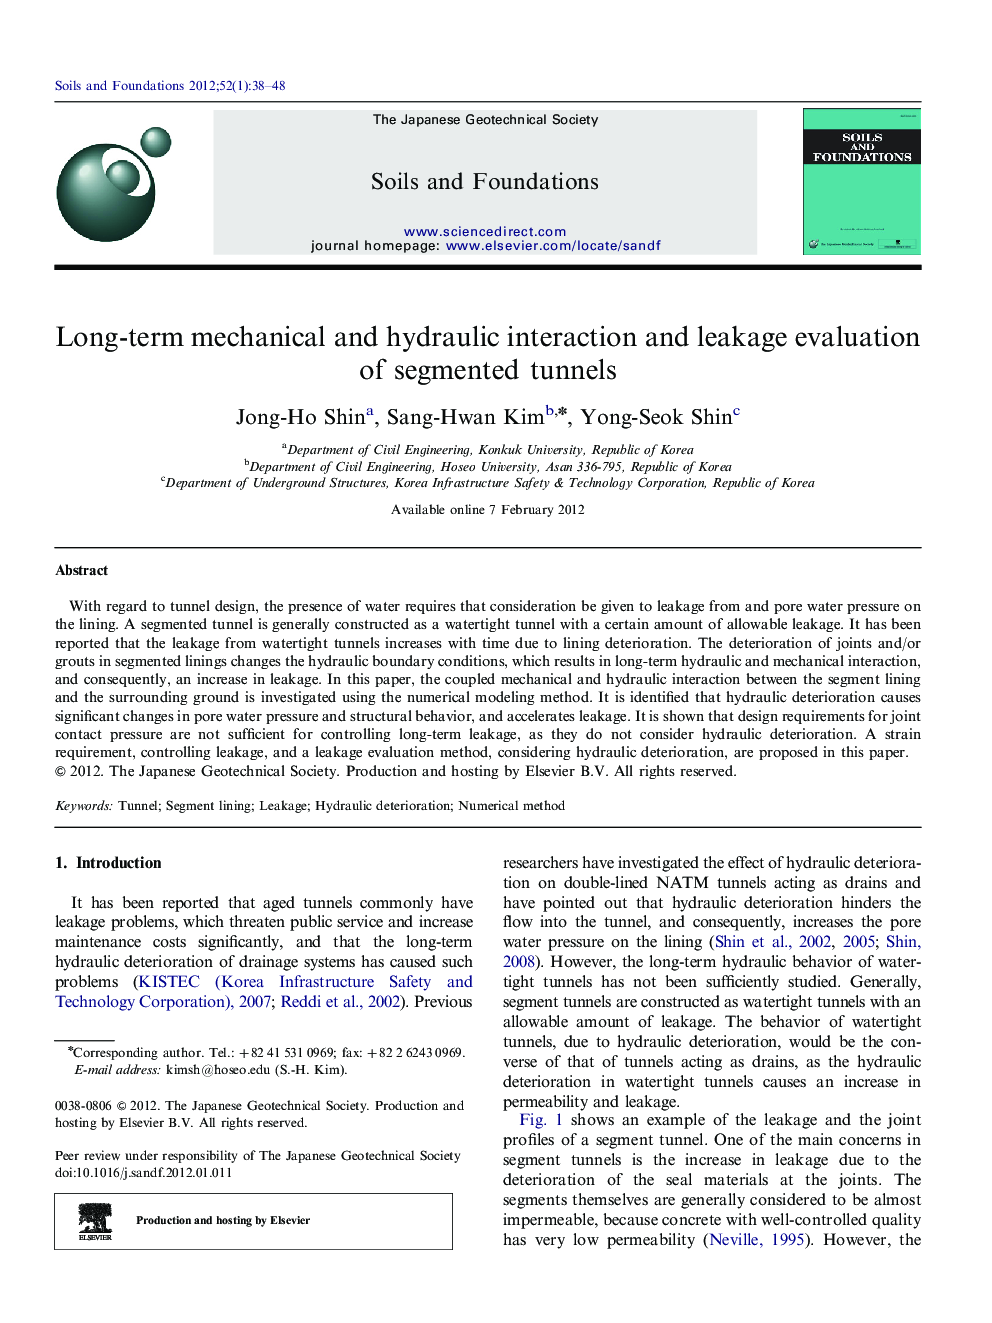 Long-term mechanical and hydraulic interaction and leakage evaluation of segmented tunnels